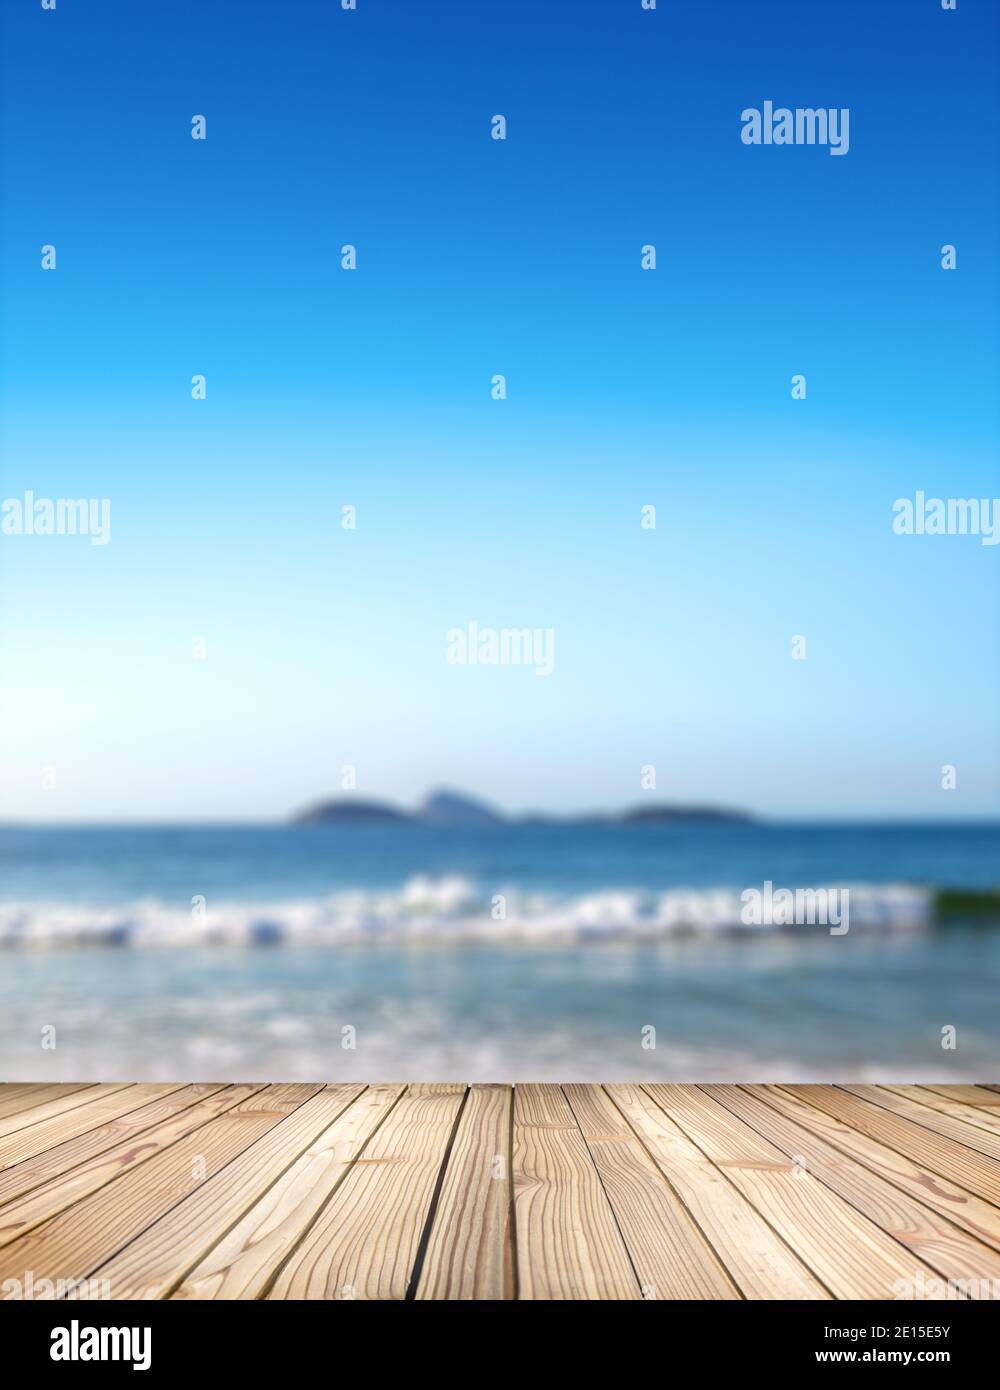 Empty stage for products. Blurred sea background with wood resort deck floor in foreground. Image of Ipanema beach in Rio de Janeiro, Brazil. Stock Photo